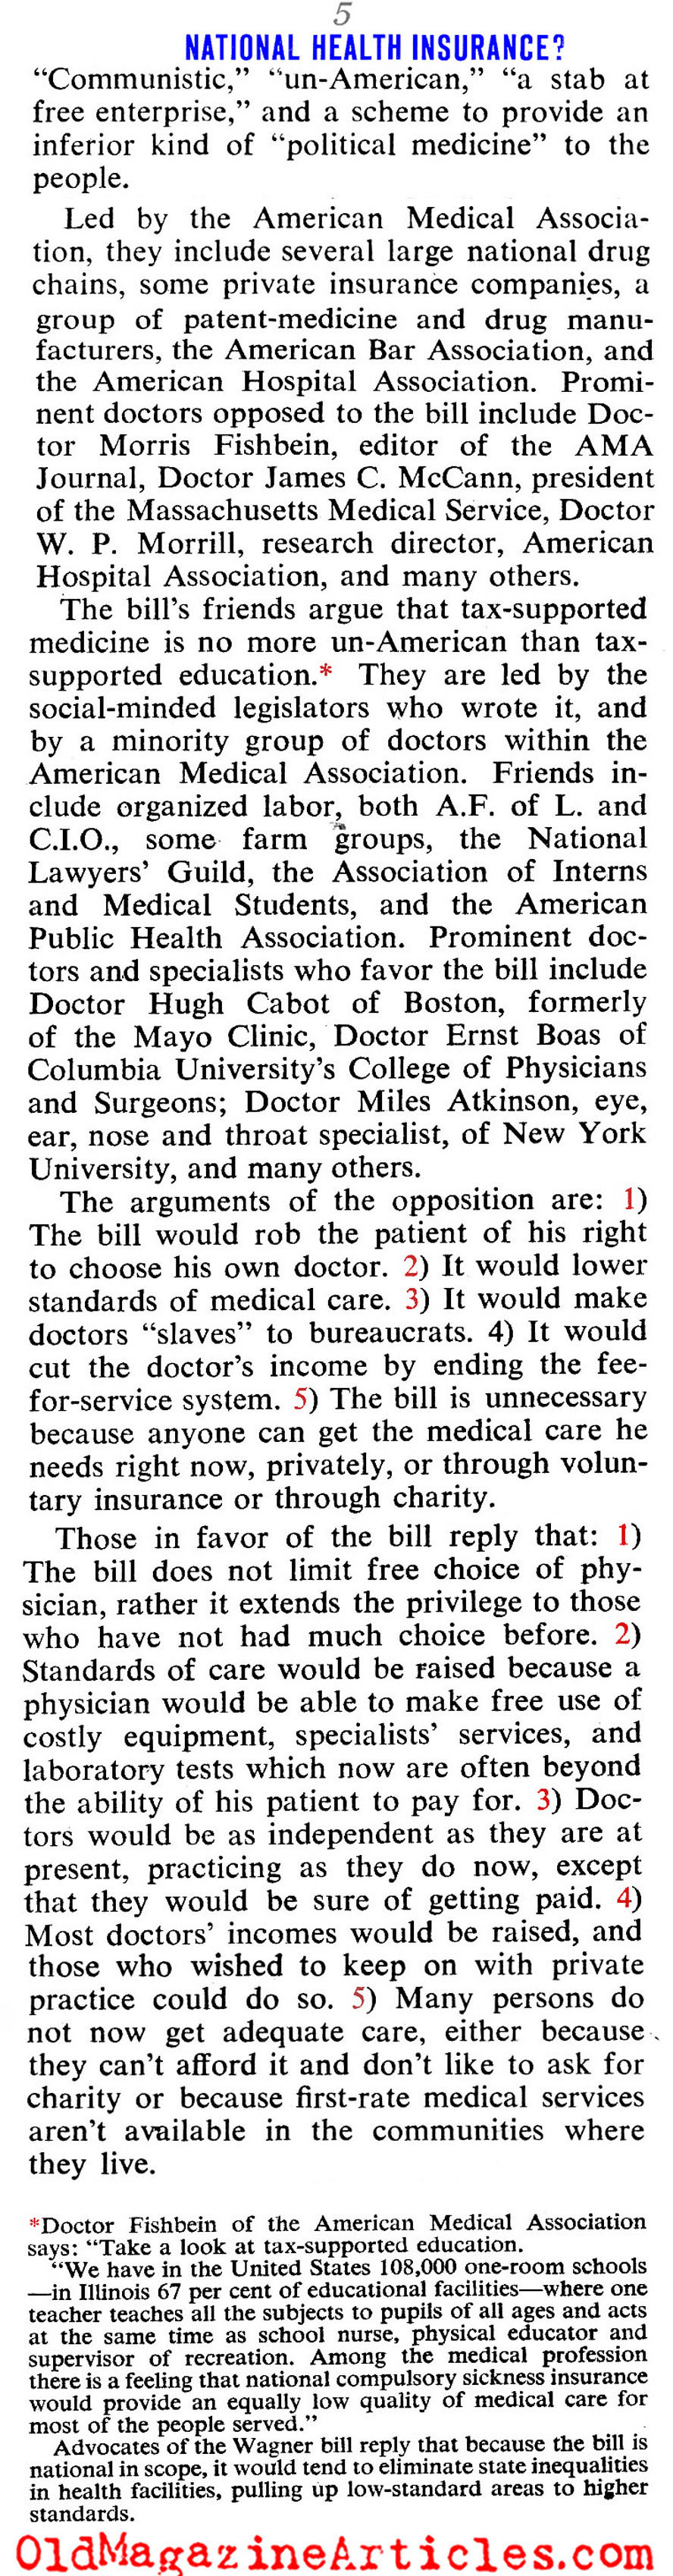 Weighing the Pros and Cons of Socialized Medicine (Collier's Magazine, 1945)